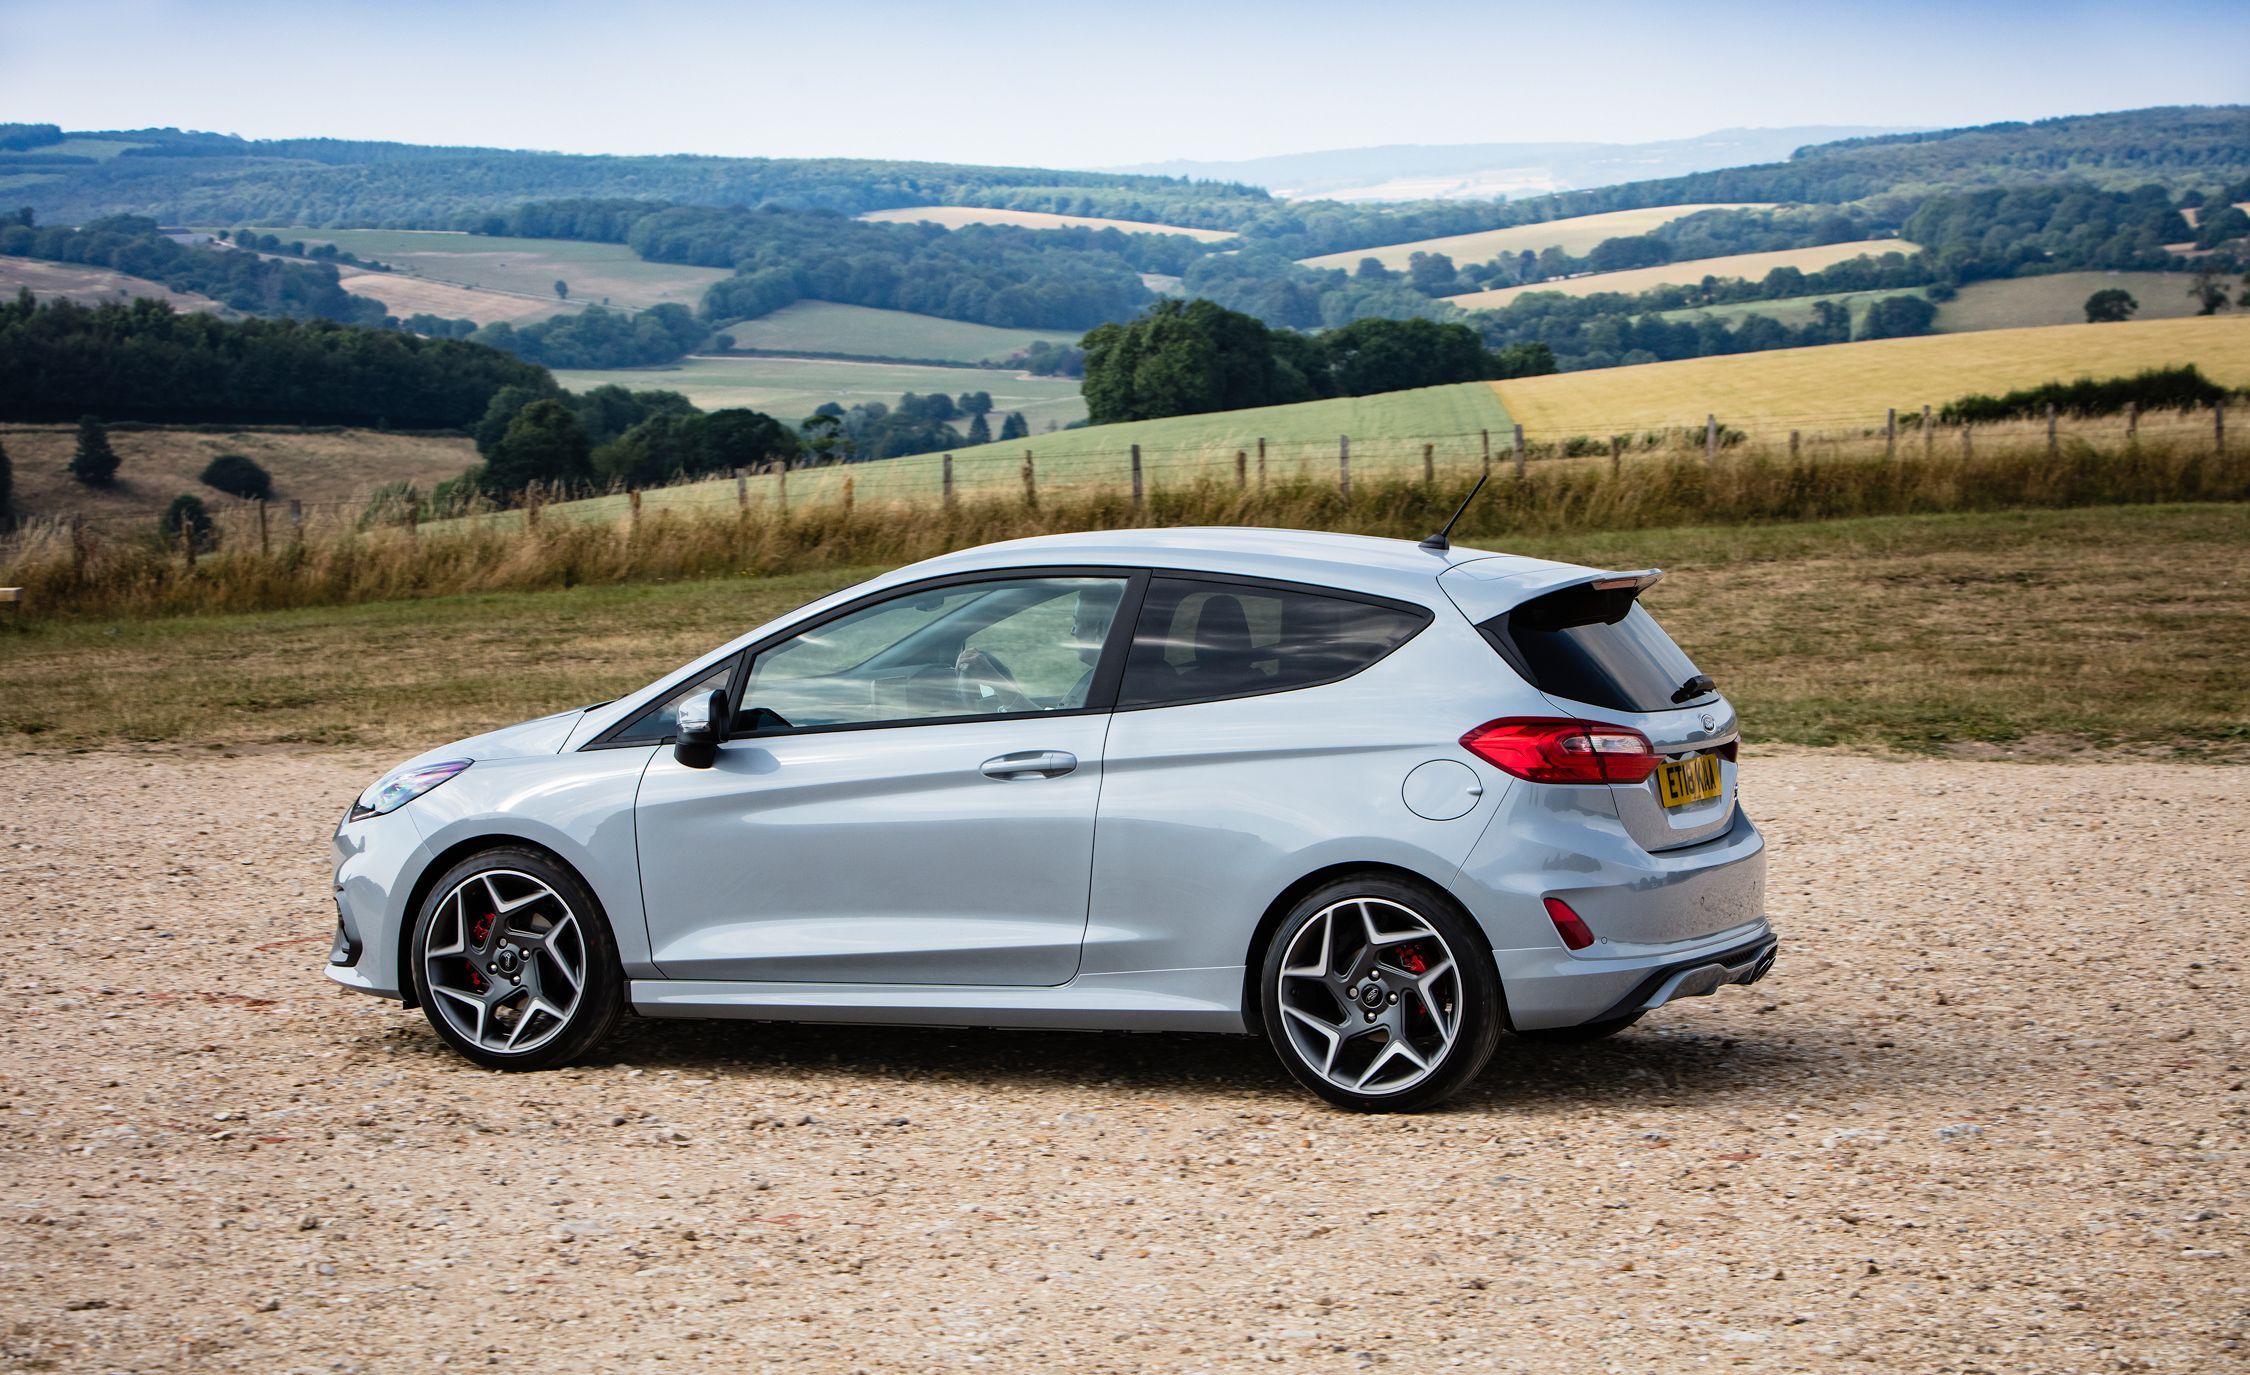 2018 Ford Fiesta St_18 (Gallery 33 of 51)